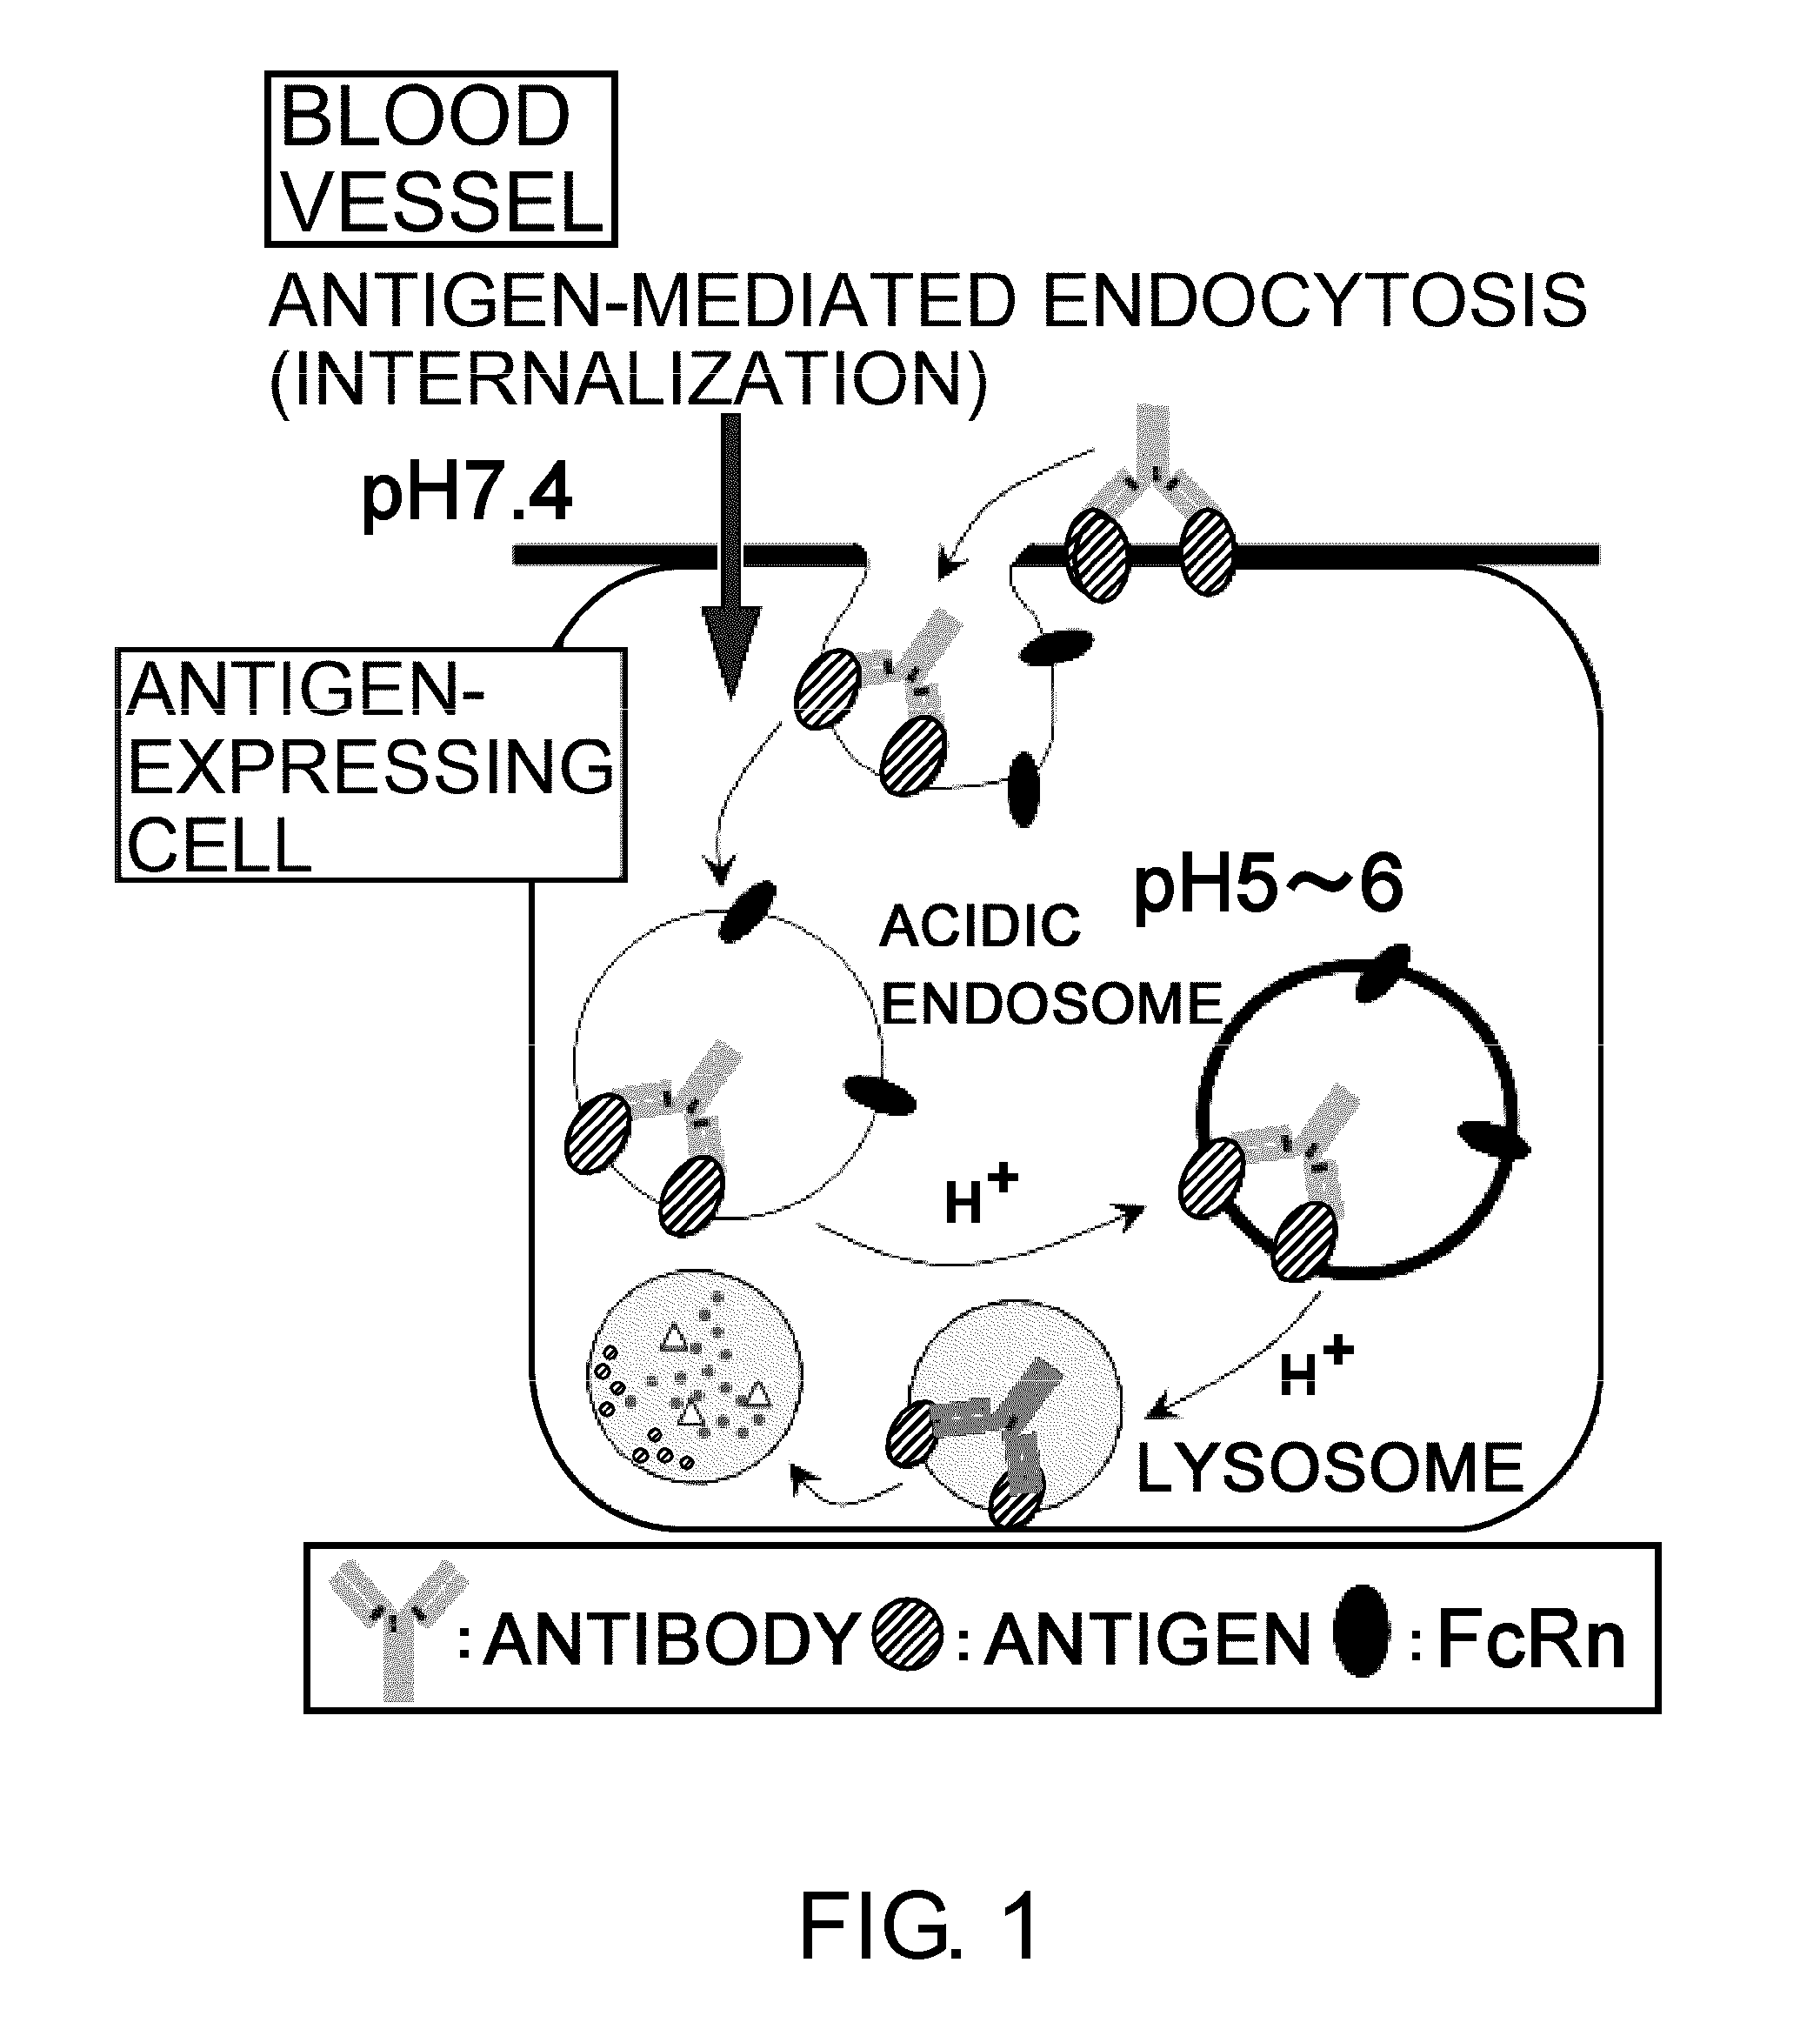 Antigen-binding molecule capable of binding to two or more antigen molecules repeatedly